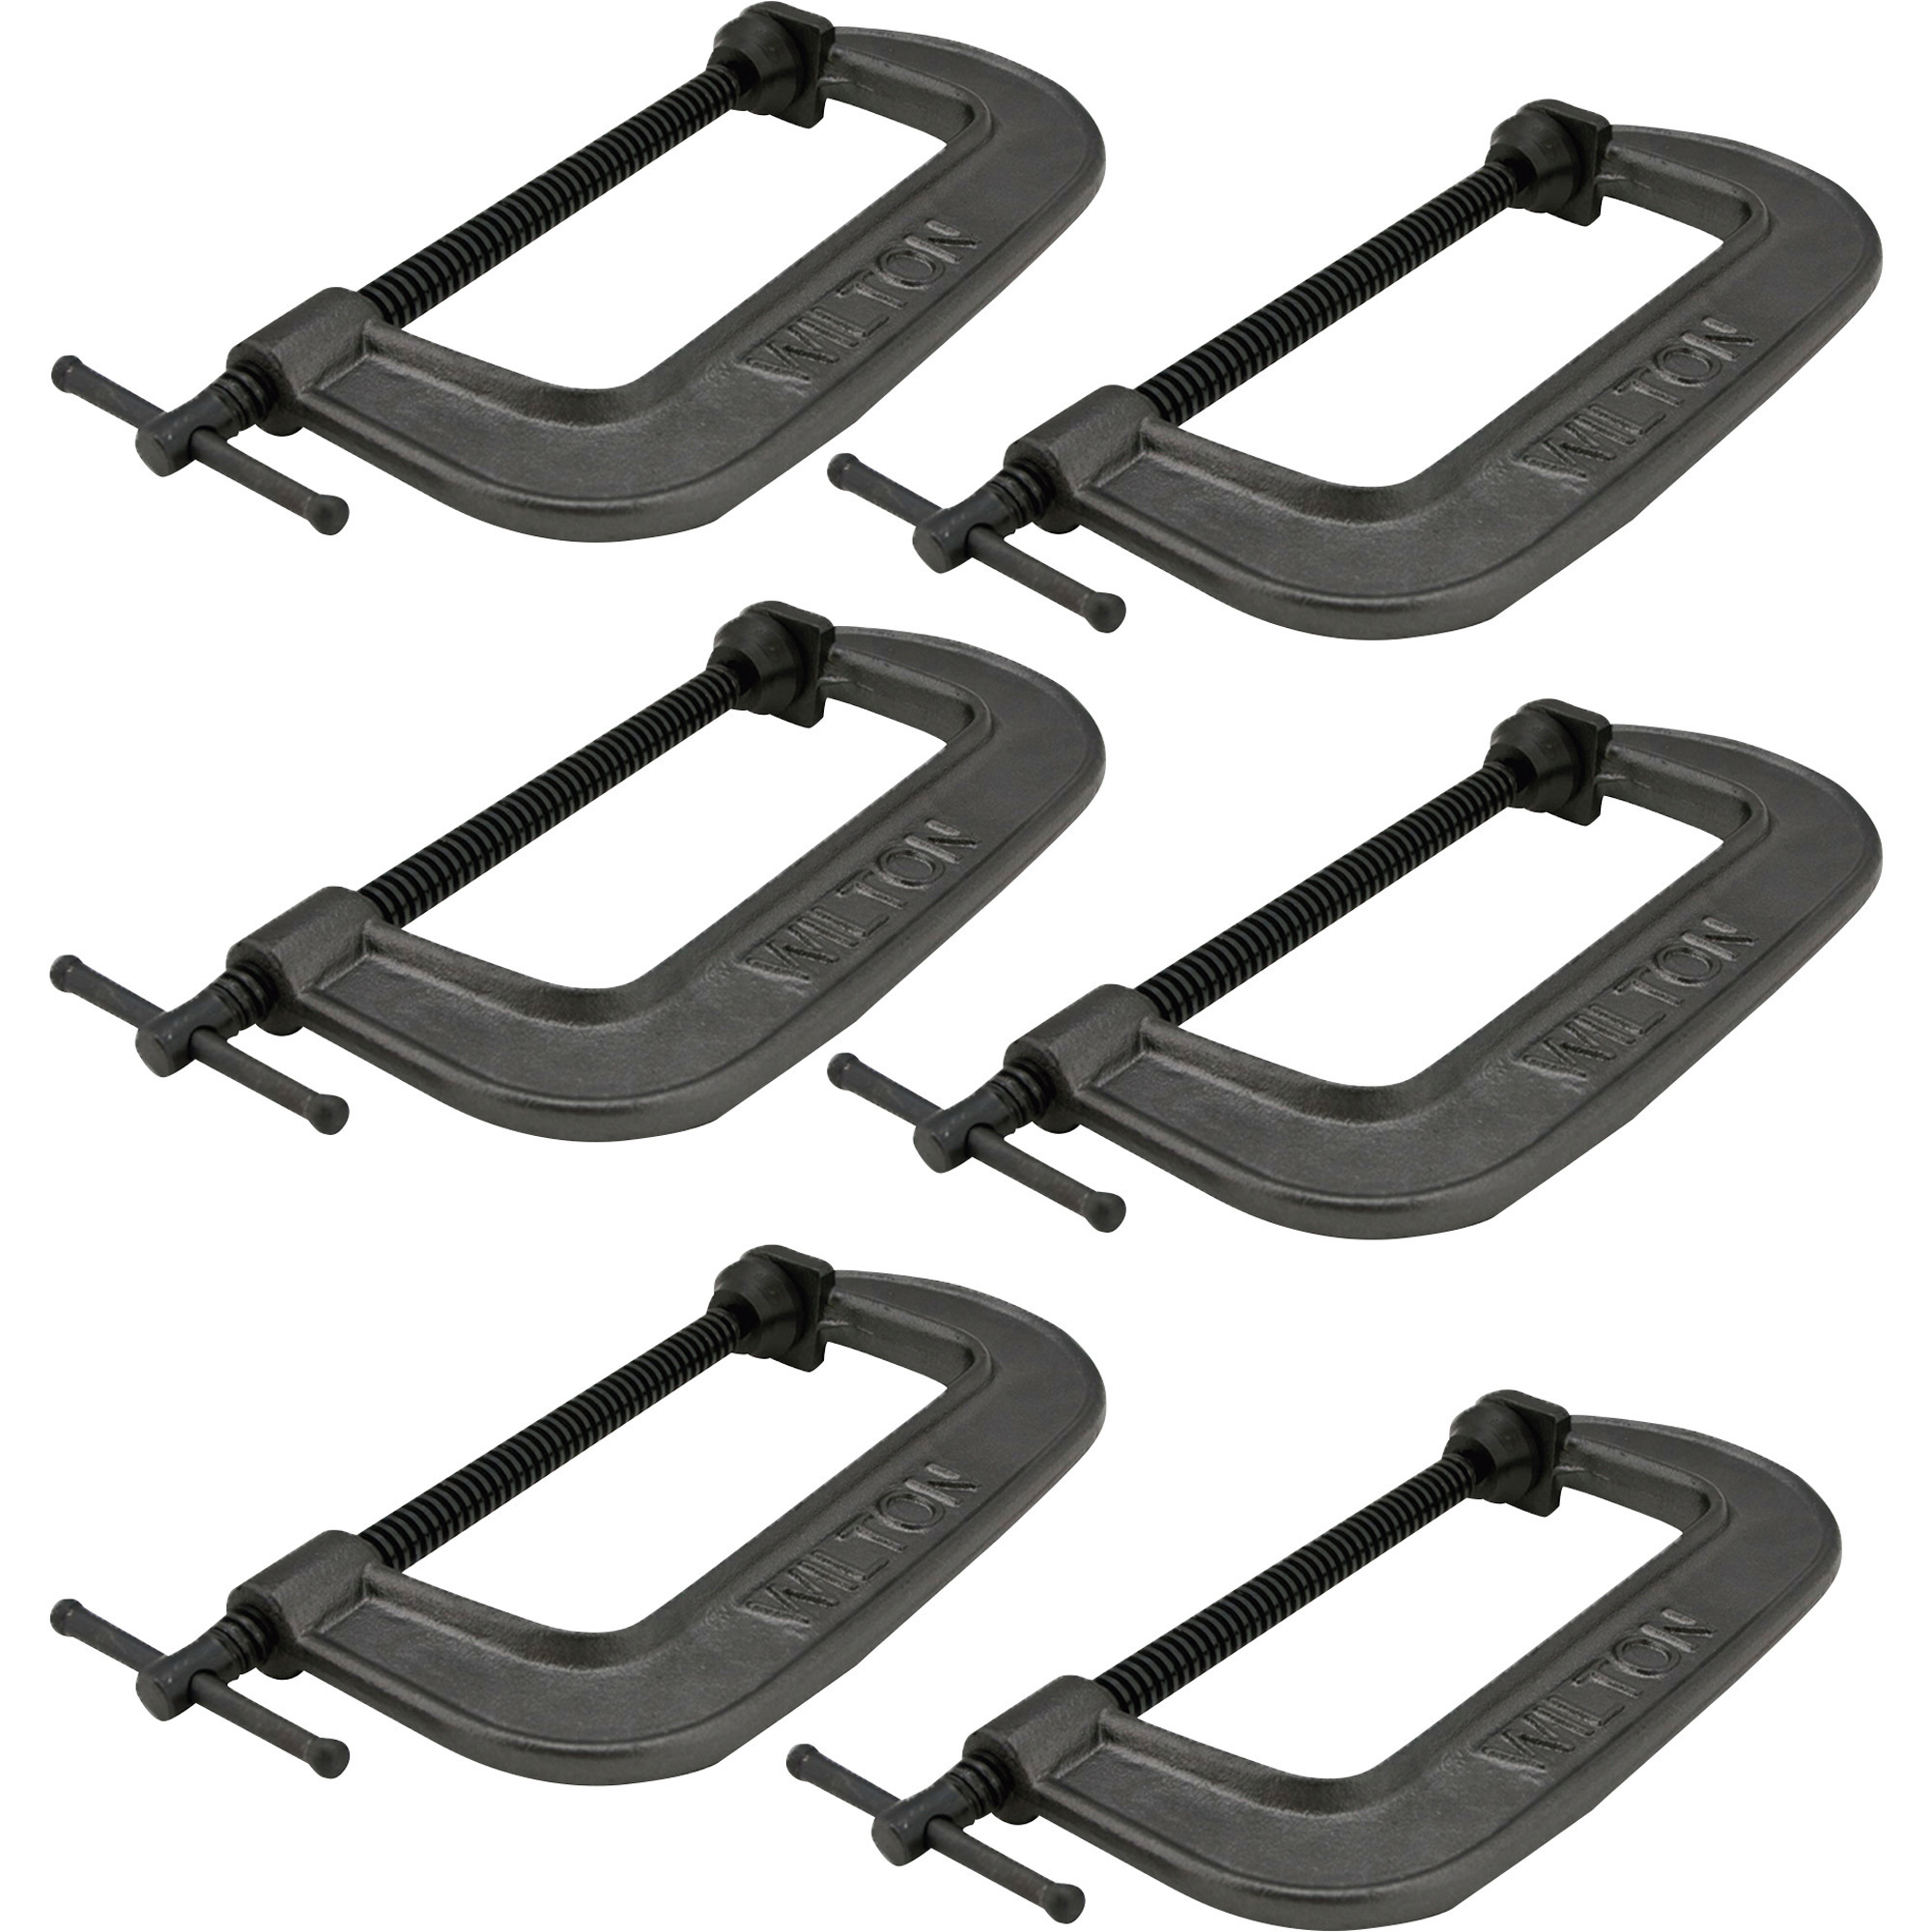 Wilton 540A Series Carriage C-Clamps, 6-pcs., 0-4Inch Opening, Model 540A-4